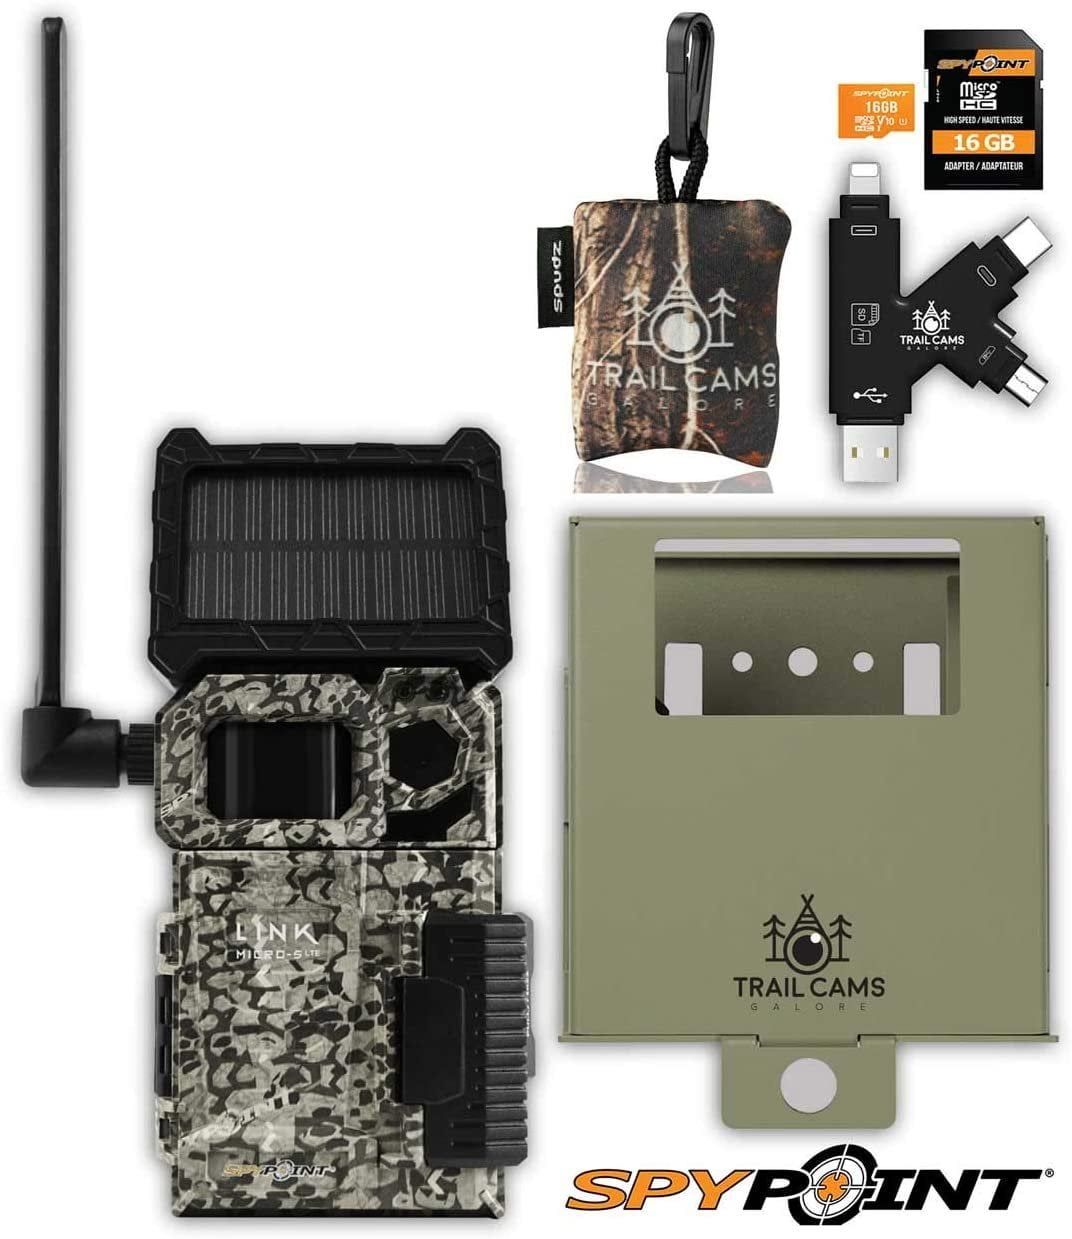 SPYPOINT LINK-MICRO-LTE TWIN Premium Pack of Cellular Trail Cameras includes 16 AA batteries and two 16g MicroSD card Low-Glow LEDs for Quality Nighttime 10MP Photos 4G/LTE photo transmission. 80’ flash and detection range